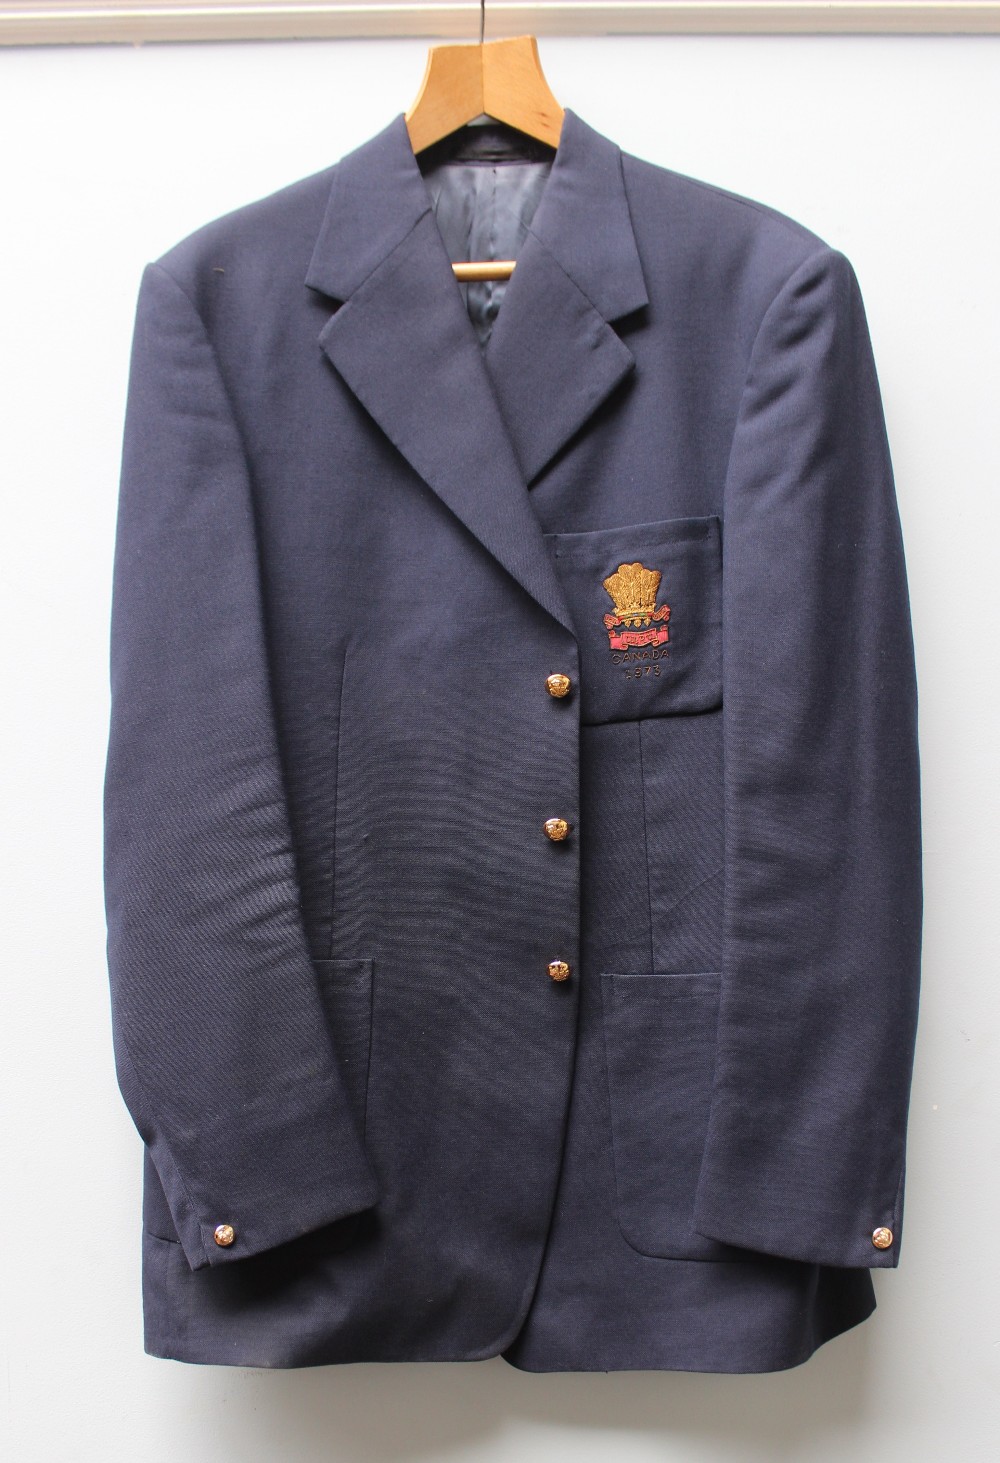 Allan Martin - 1973 Wales tour to Canada team blazer - Prince of Wales feather  embroidered crest, - Image 2 of 2